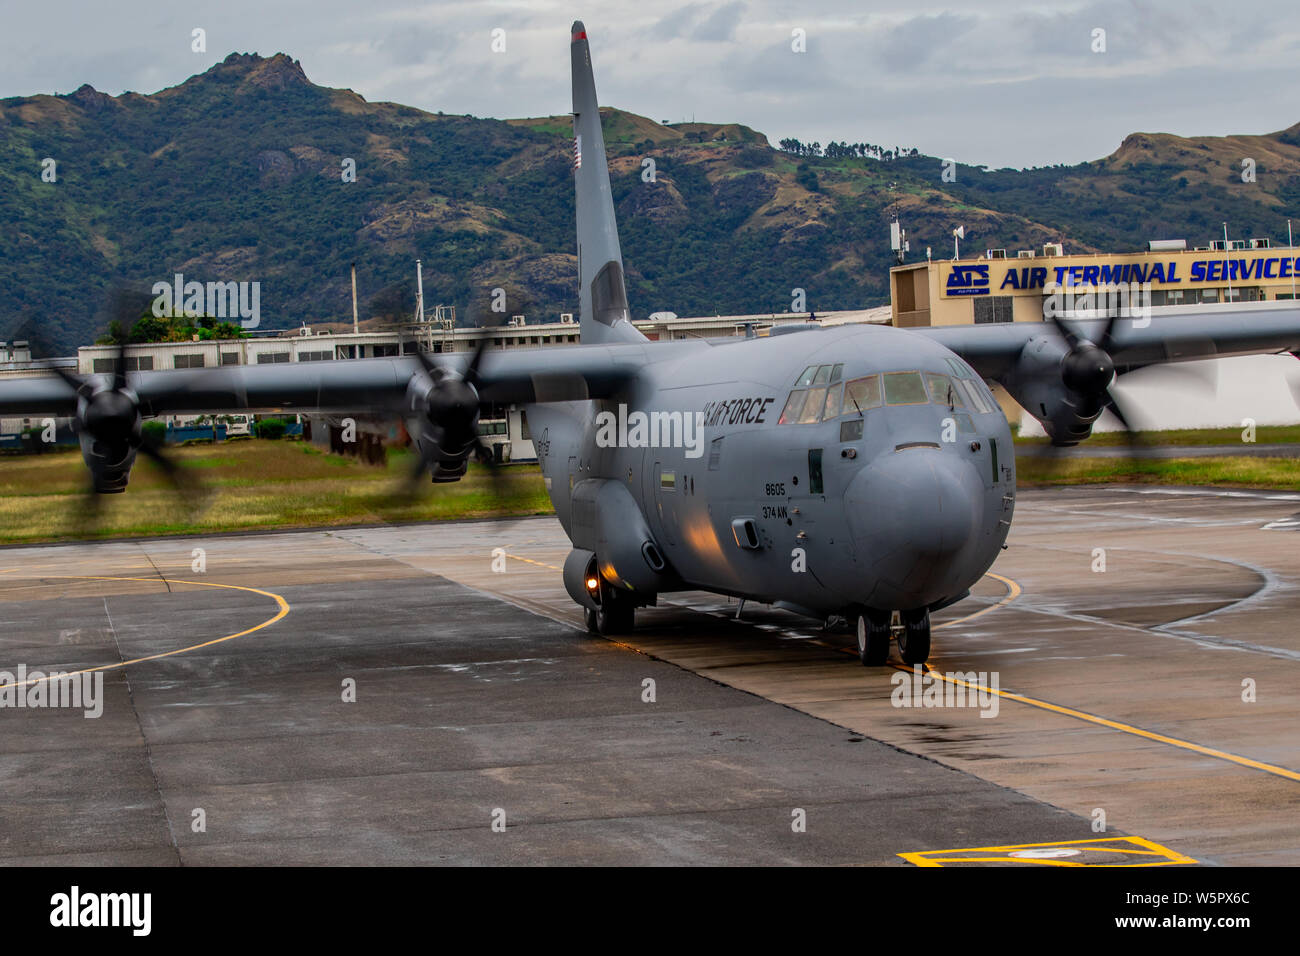 A C-130 Hercules taxis down a runway at the Nadi International Airport, July 27. The aircraft was one of two that brought U.S. Army Soldiers serving with the 1st Battalion, 27th Infantry Regiment, 2nd Brigade, 25th Infantry Brigade Combat Team, 25th Infantry Division, to stage for Exercise Cartwheel 2019 that will start on the 29th. Exercise Cartwheel is a bilateral military-to-military training exercise, and is an opportunity to enhance professional relationships, military operations, and readiness between the U.S. Army and Fijian forces while strengthening security relations for a free and o Stock Photo